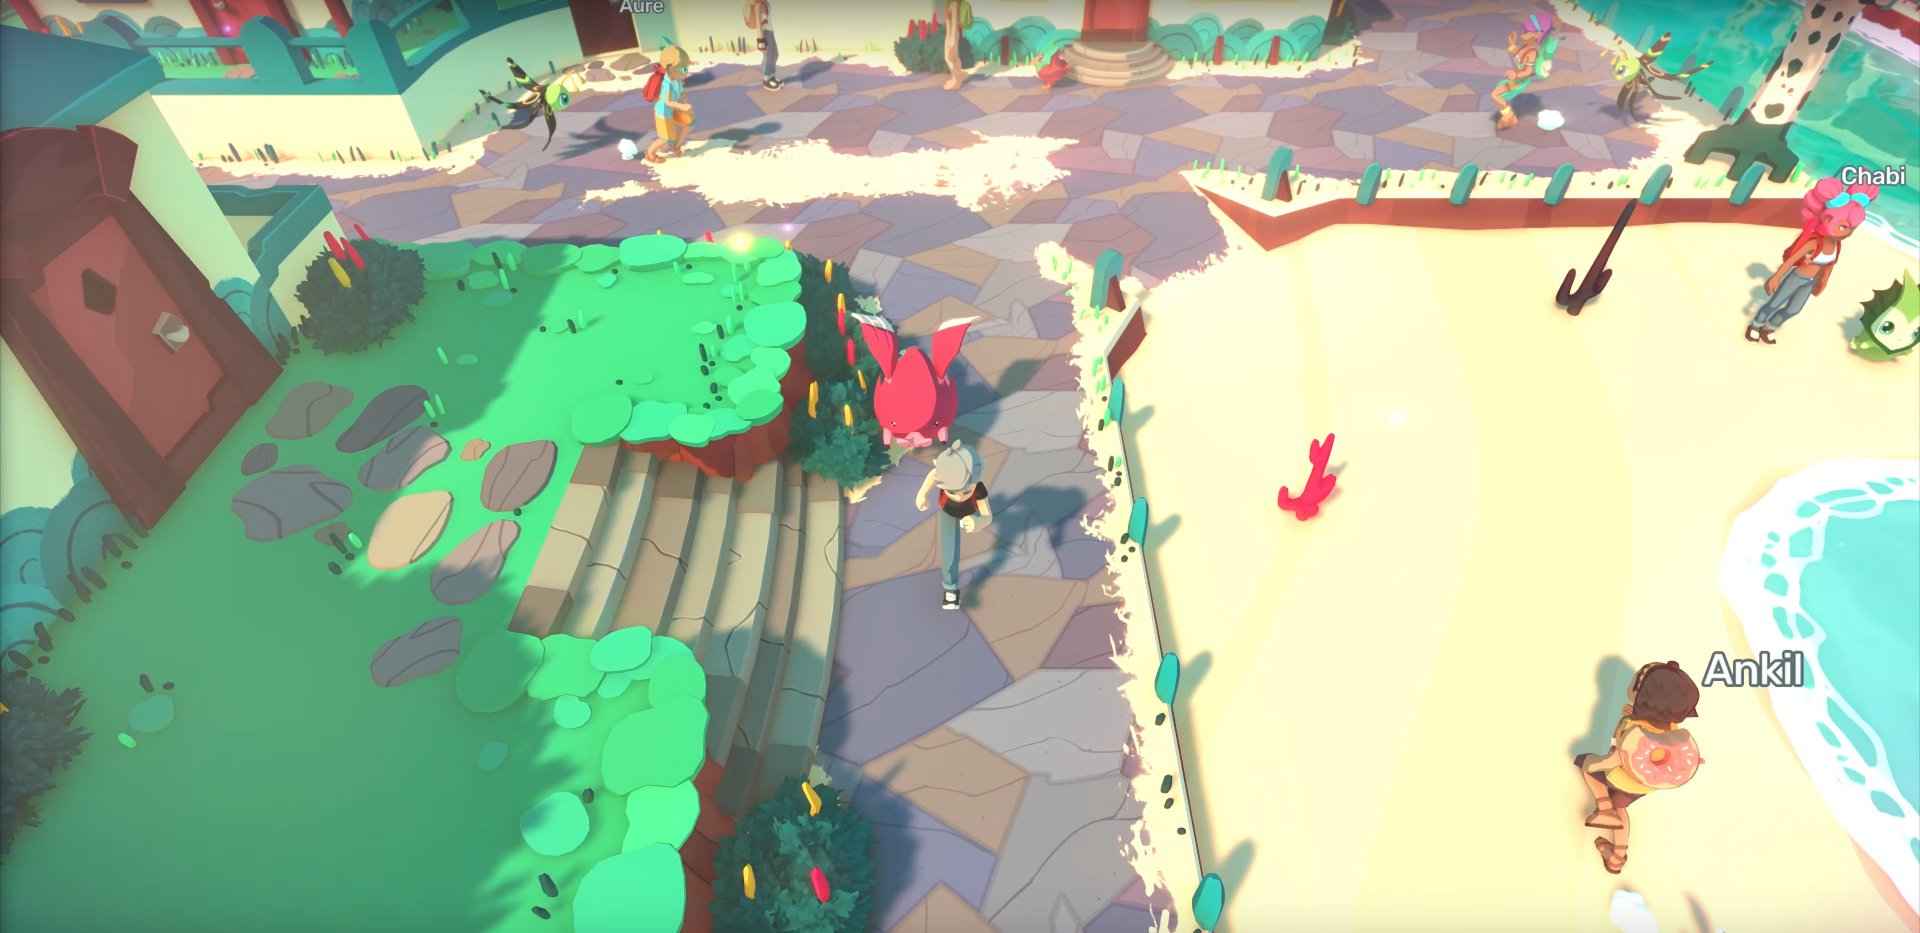 Temtem new patch update 0.5.12 & Weekly Reset Saipark and Freetem (February 17- February 23)